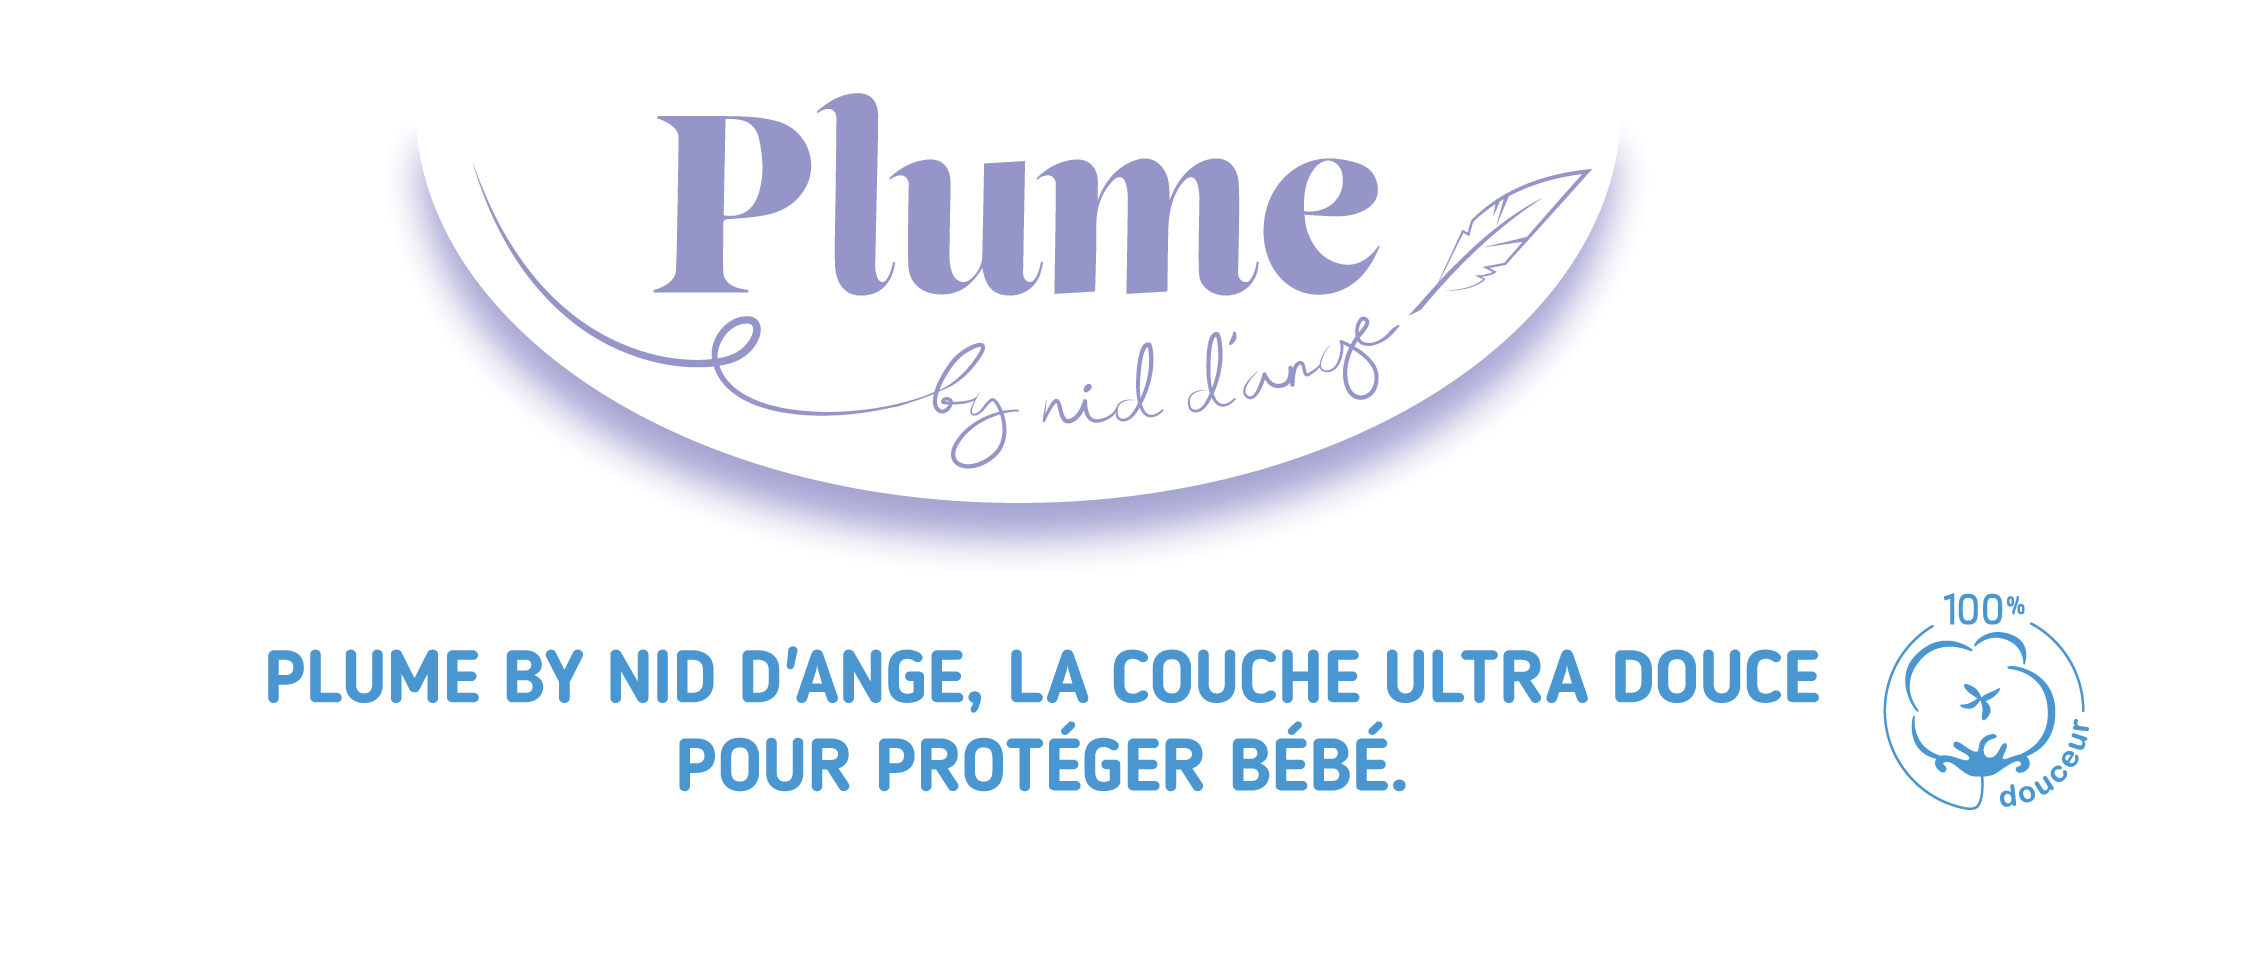 Plume by nid d'ange